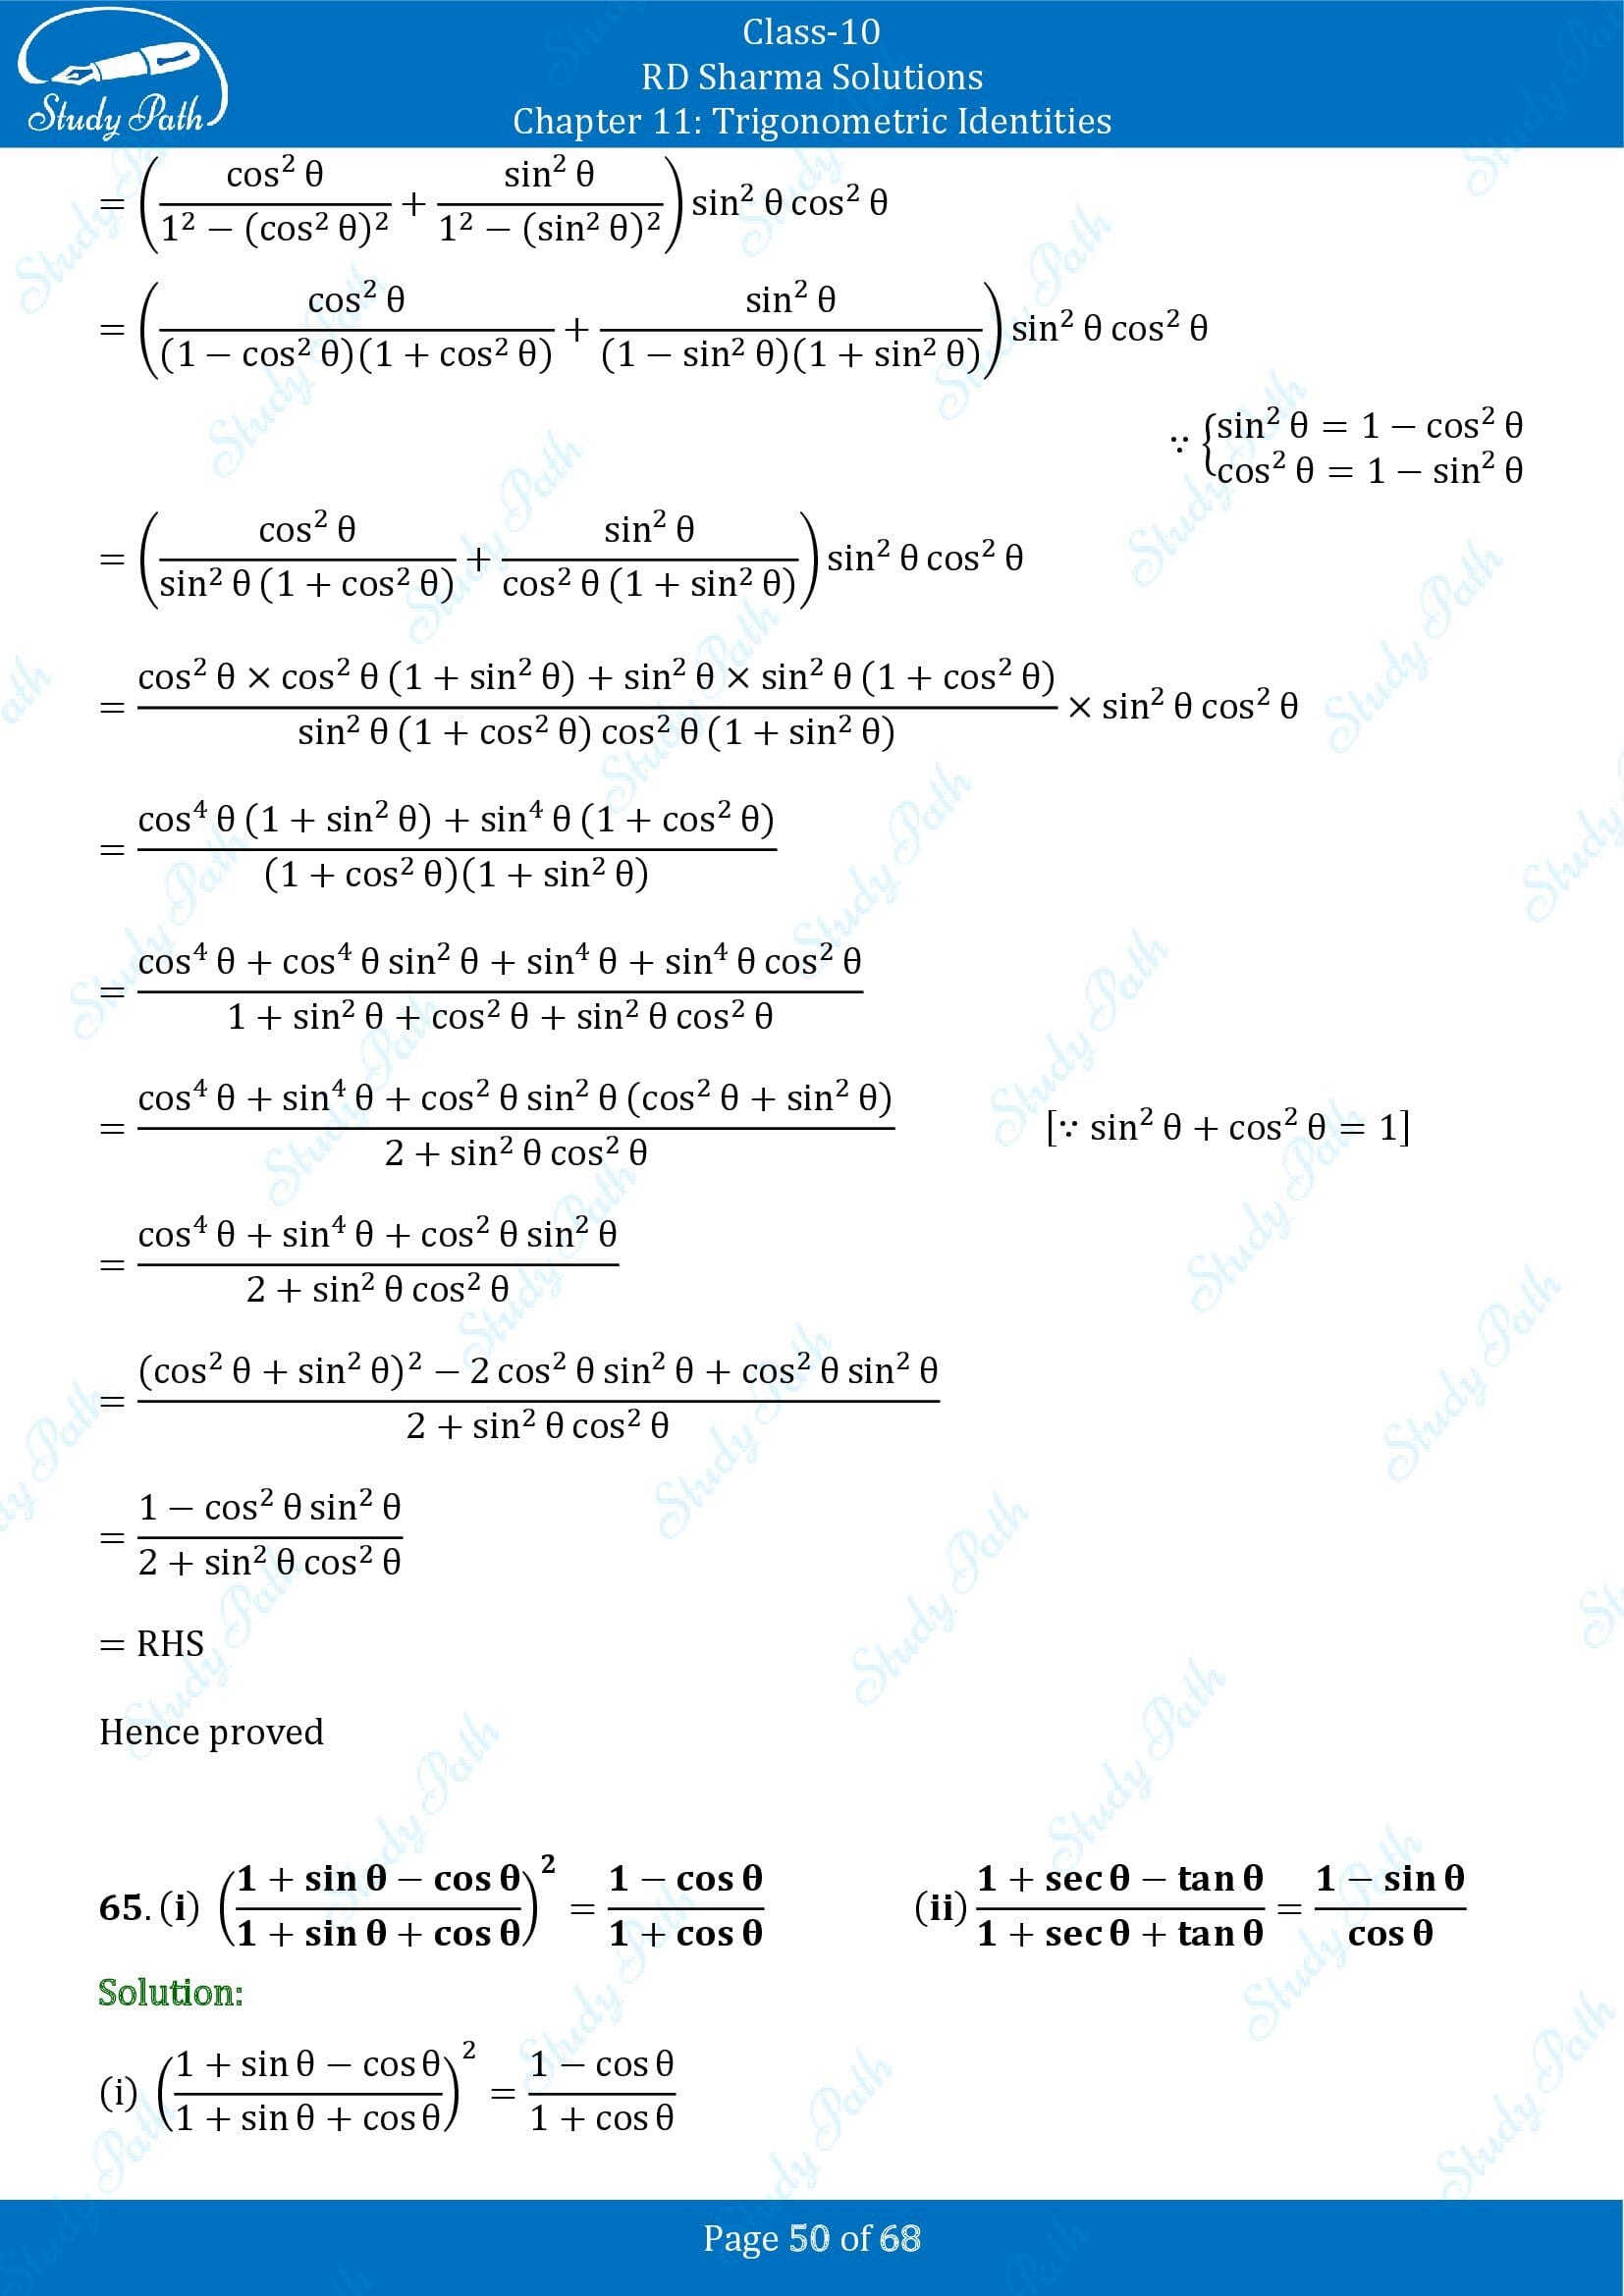 RD Sharma Solutions Class 10 Chapter 11 Trigonometric Identities Exercise 11.1 00050